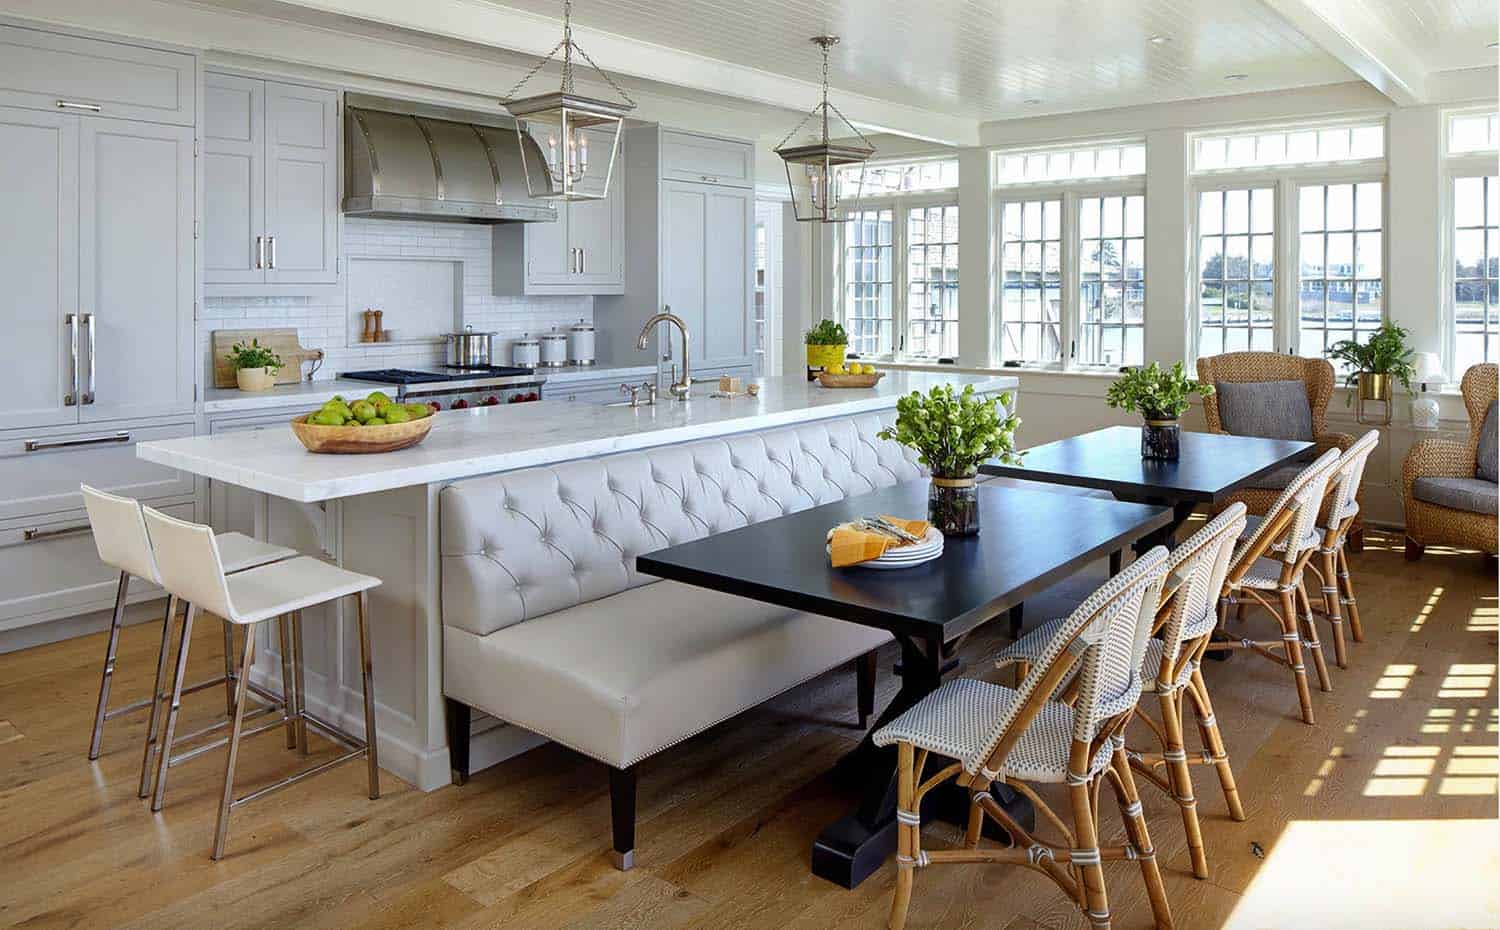 25 Absolutely Gorgeous Transitional Style Kitchen Ideas Cabinets in this design style tend to be low profile. absolutely gorgeous transitional style